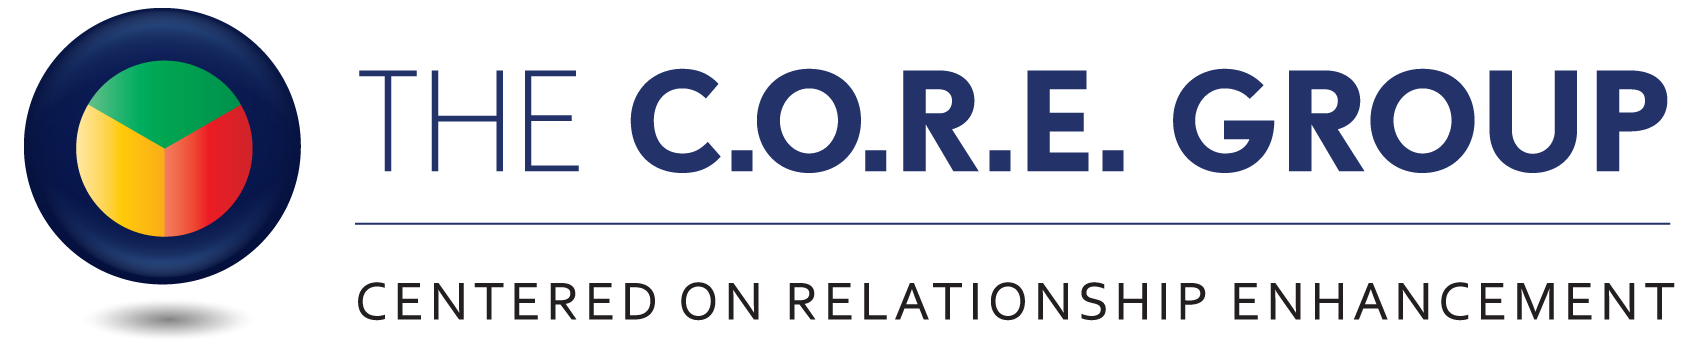 The C.O.R.E. Group  |  Centered On Relationship Enhancement